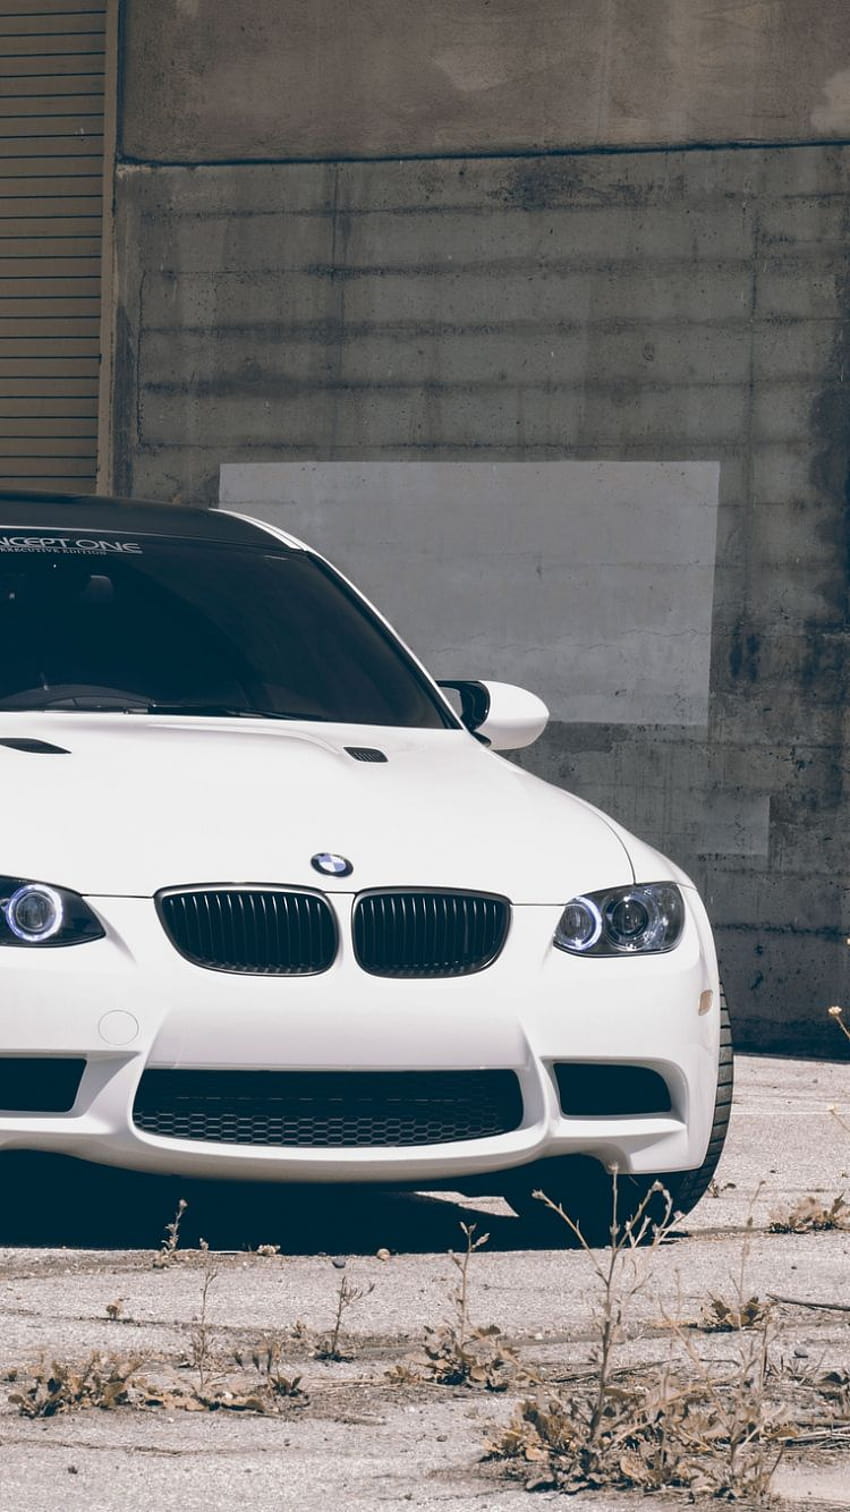 Download wallpaper 800x1200 bmw m3 bmw car black front view iphone 4s4  for parallax hd background